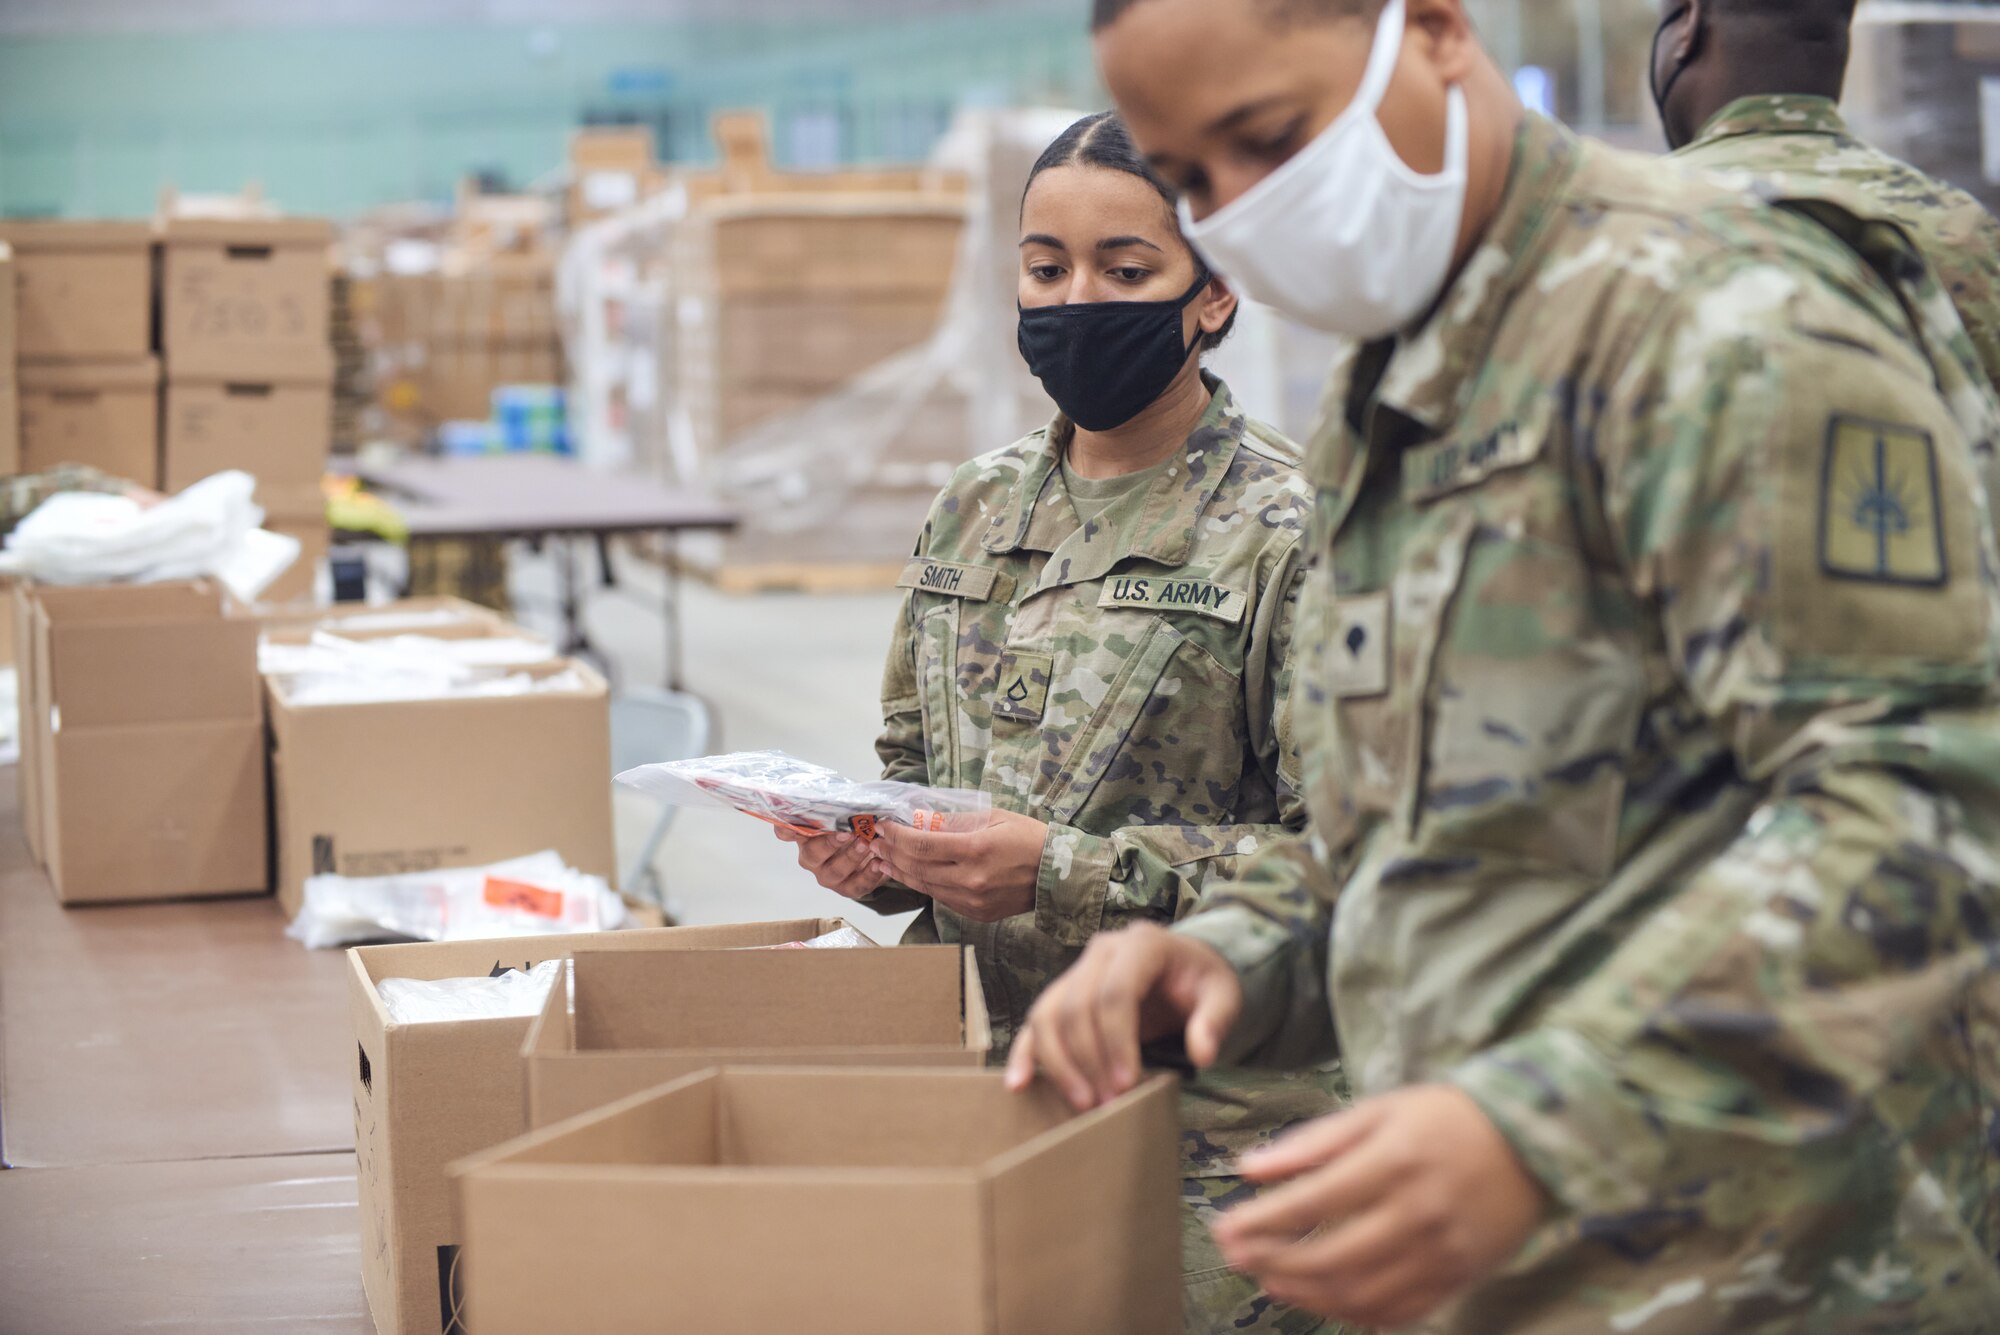 Army Pfc. Sydney Smith, with the 206th Military Police Company, and Spc. Claude Hamilton, a construction engineer assigned to the 1156th Engineer Company, assemble COVID-19 test kits to be shipped across New York state, at Hudson Valley Community College in Troy April 13, 2021. The Guard has helped assemble and ship 10 million test kits since last April.